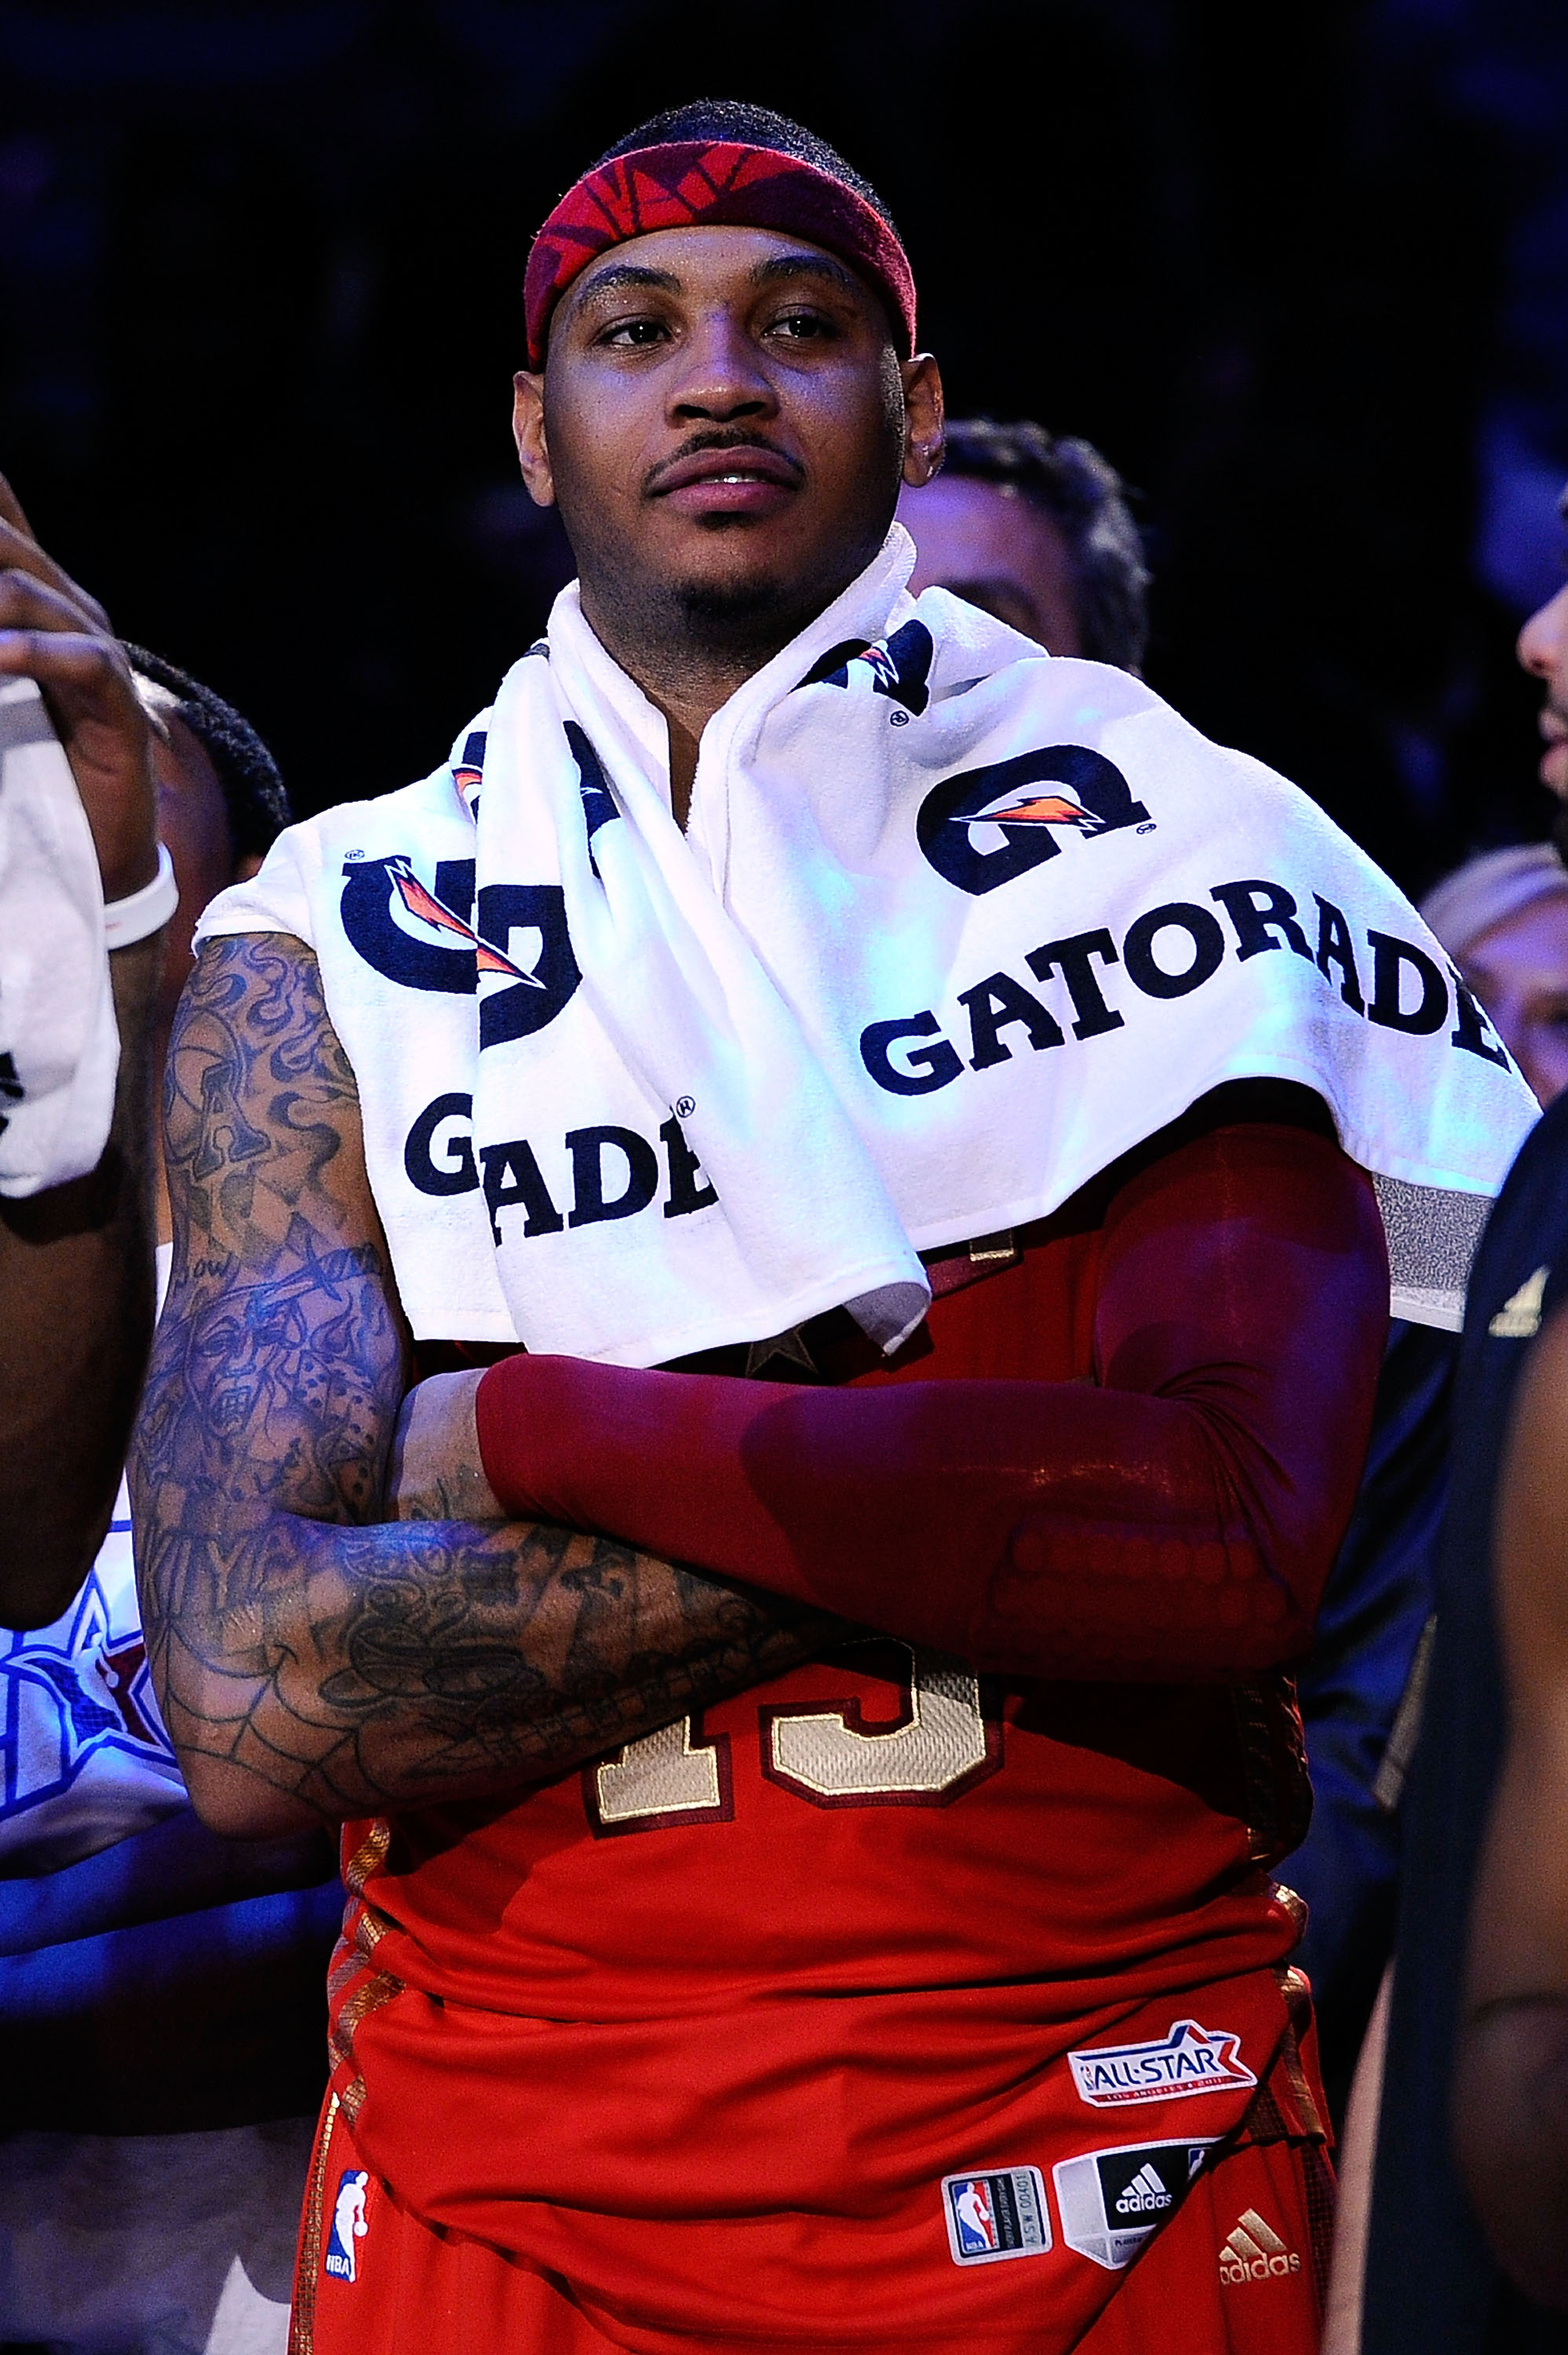 LOS ANGELES, CA - FEBRUARY 20:  Carmelo Anthony #15 of the Denver Nuggets and the Western Conference looks on after the Western Conference 148-143 victory in the 2011 NBA All-Star Game at Staples Center on February 20, 2011 in Los Angeles, California. NOT